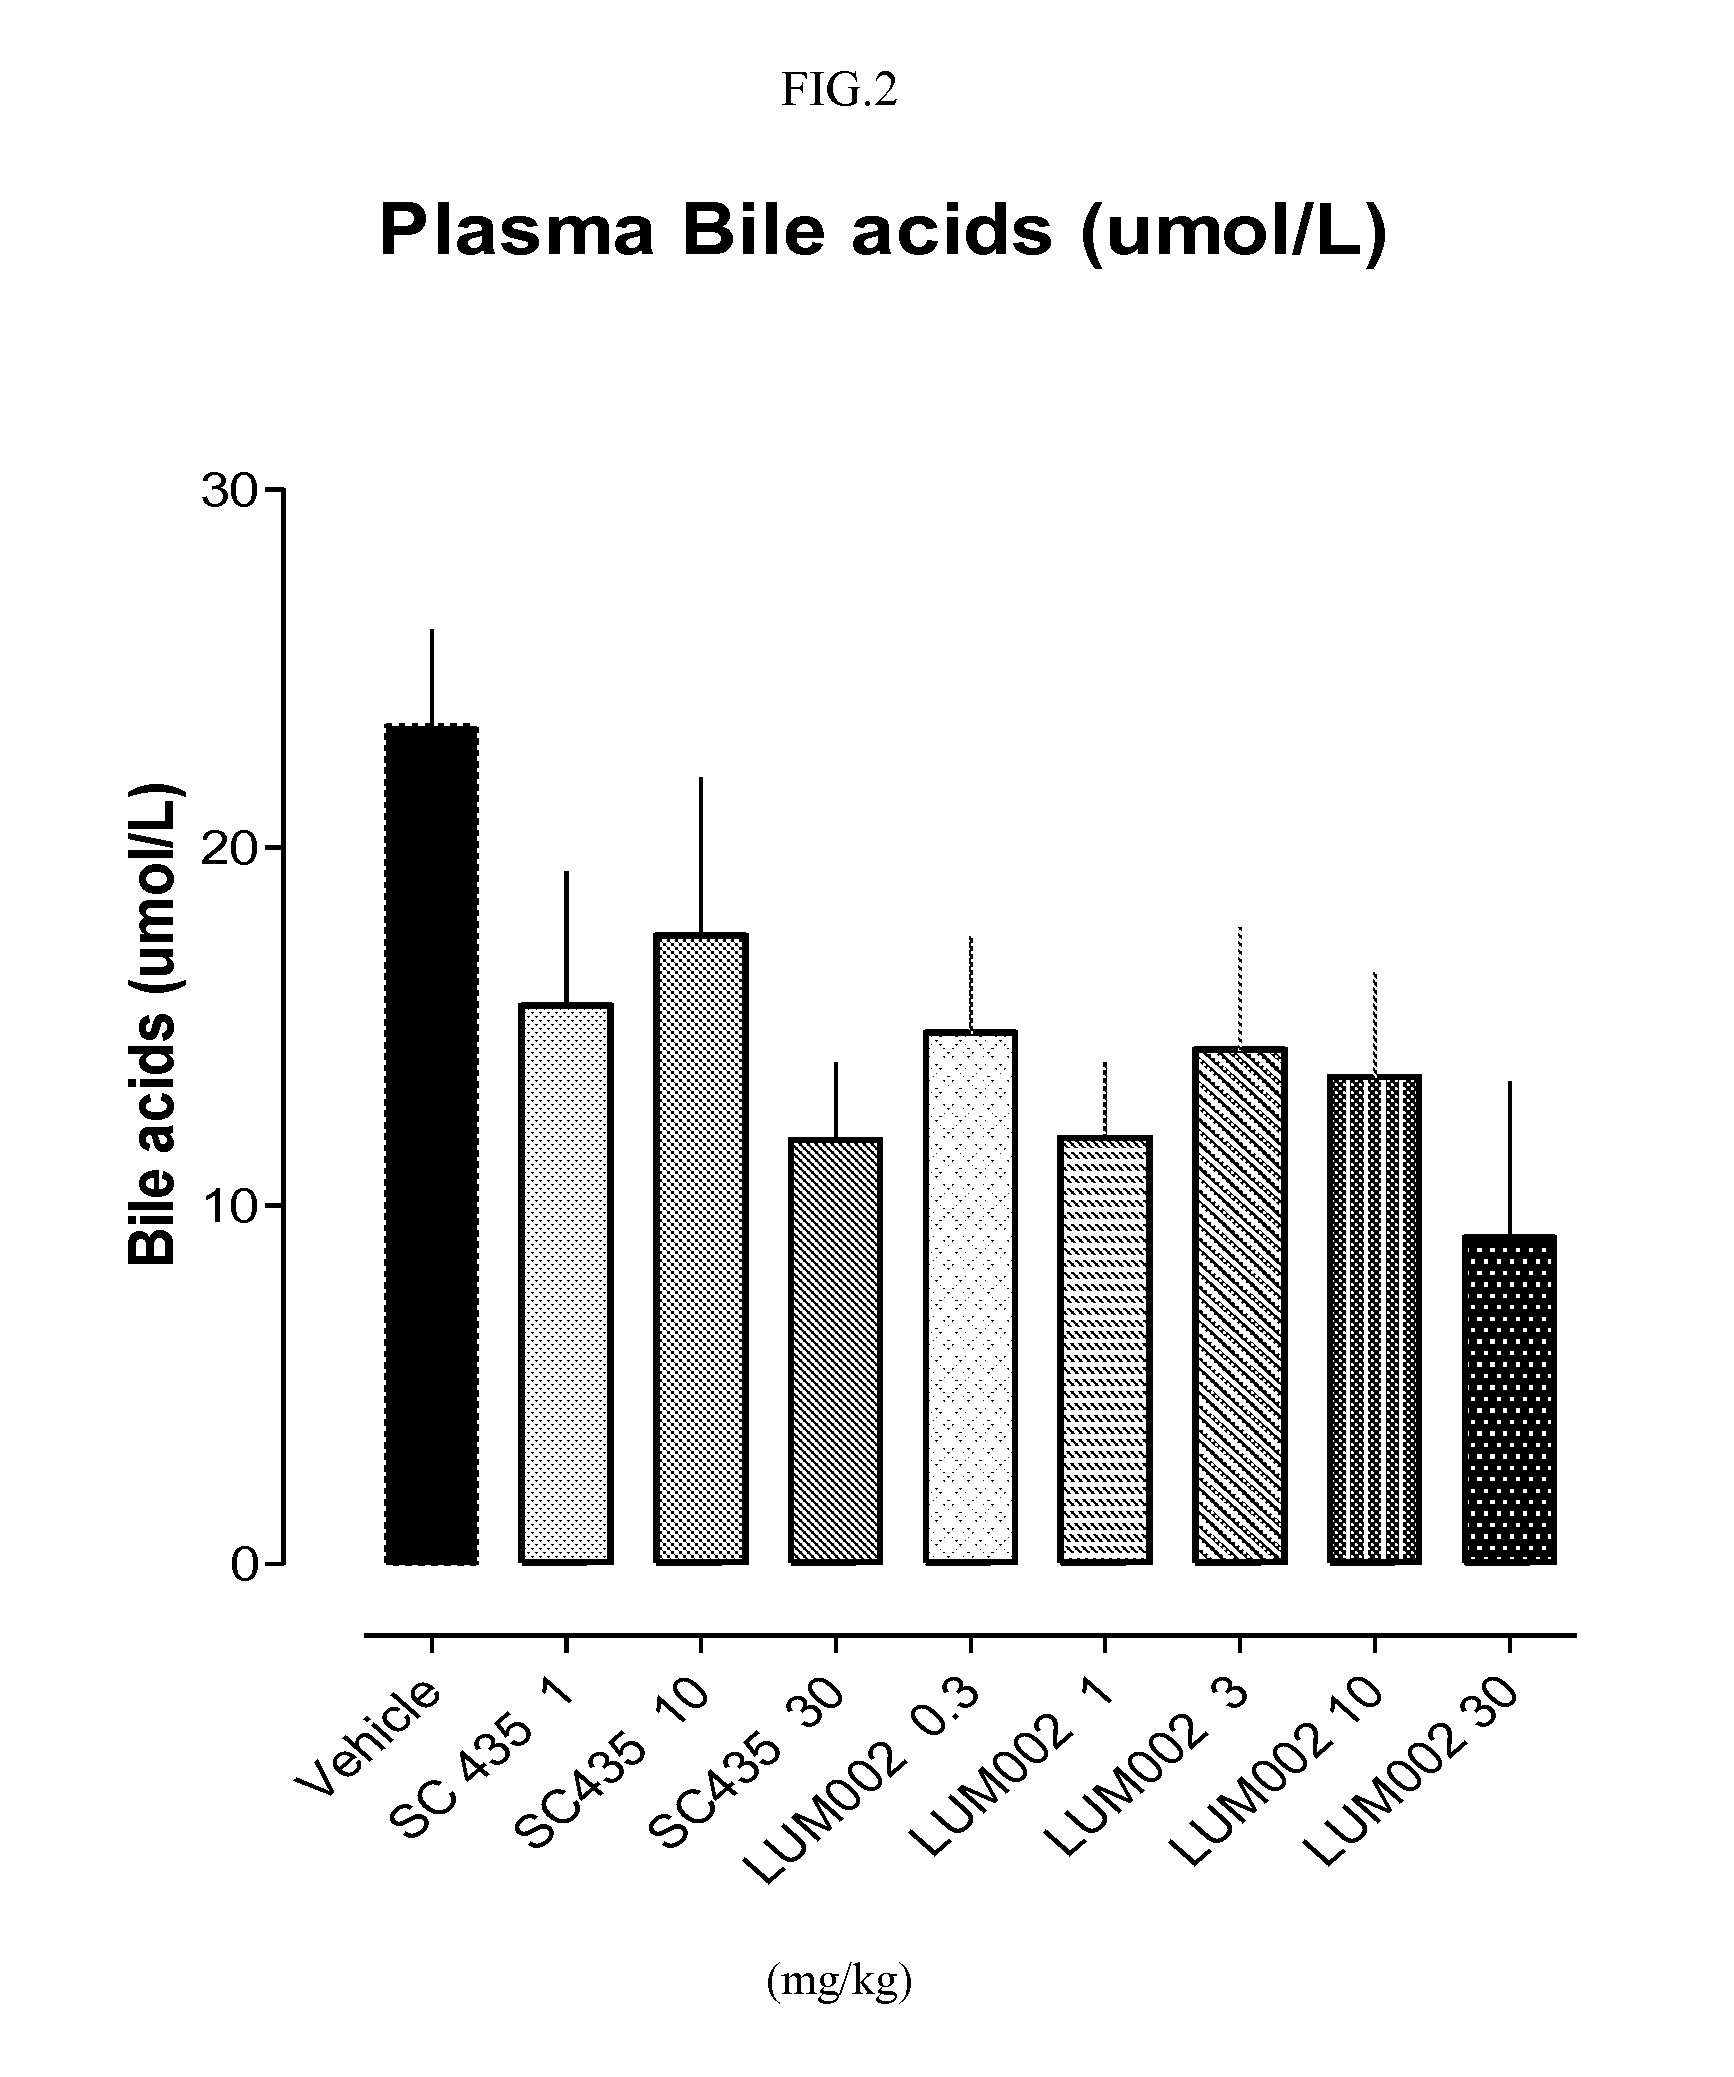 Bile acid recycling inhibitors for treatment of hypercholemia and cholestatic liver disease